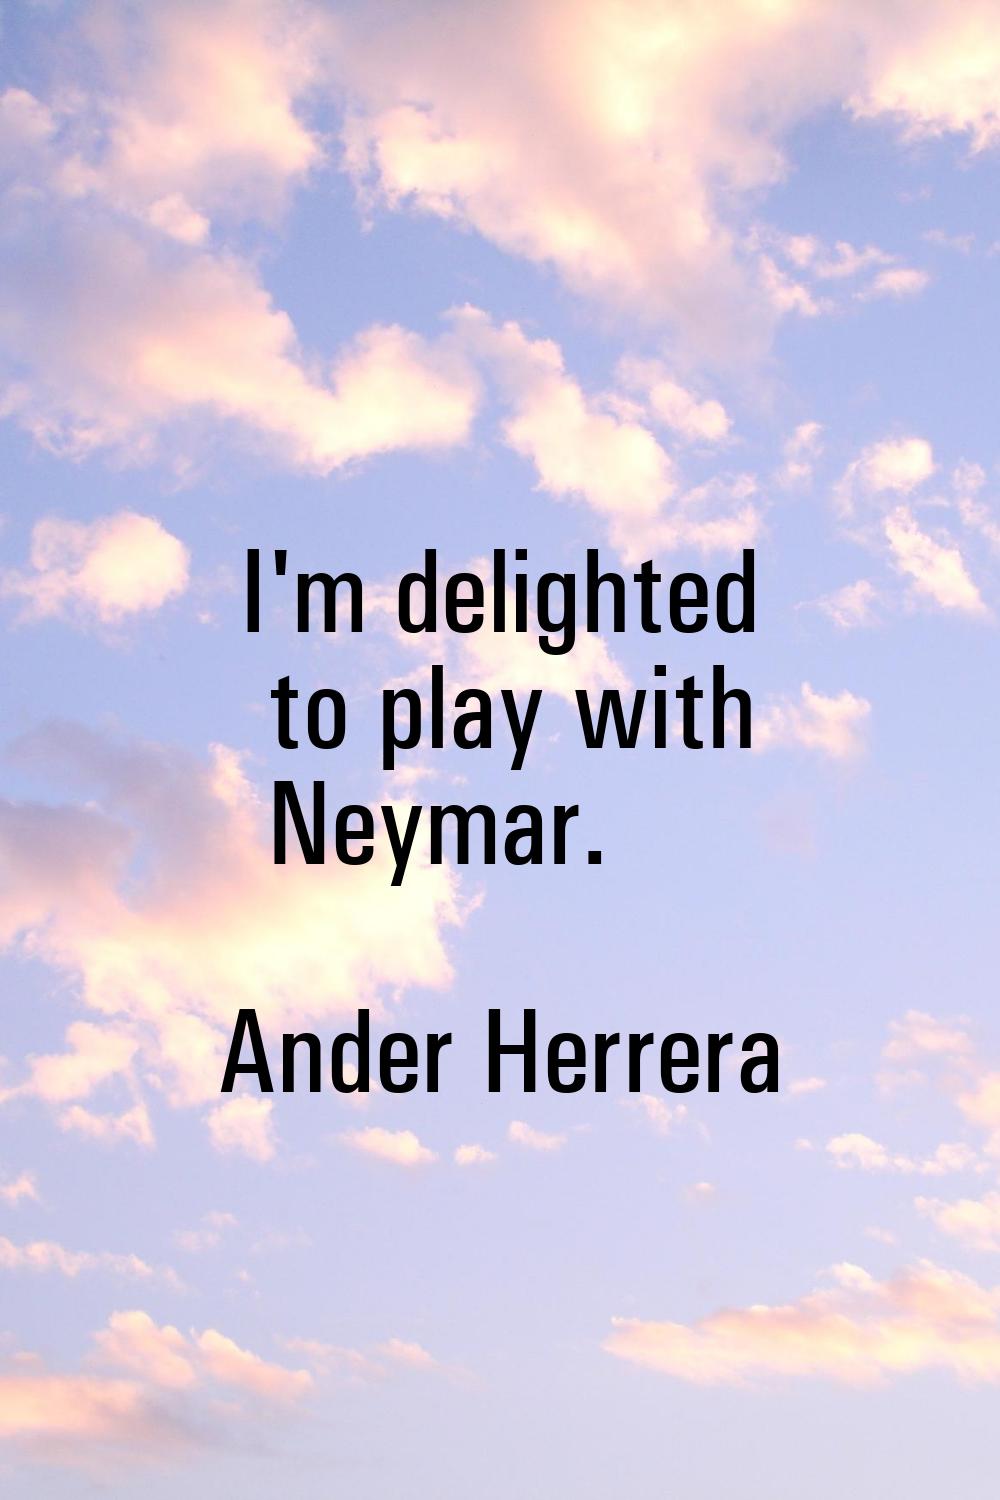 I'm delighted to play with Neymar.